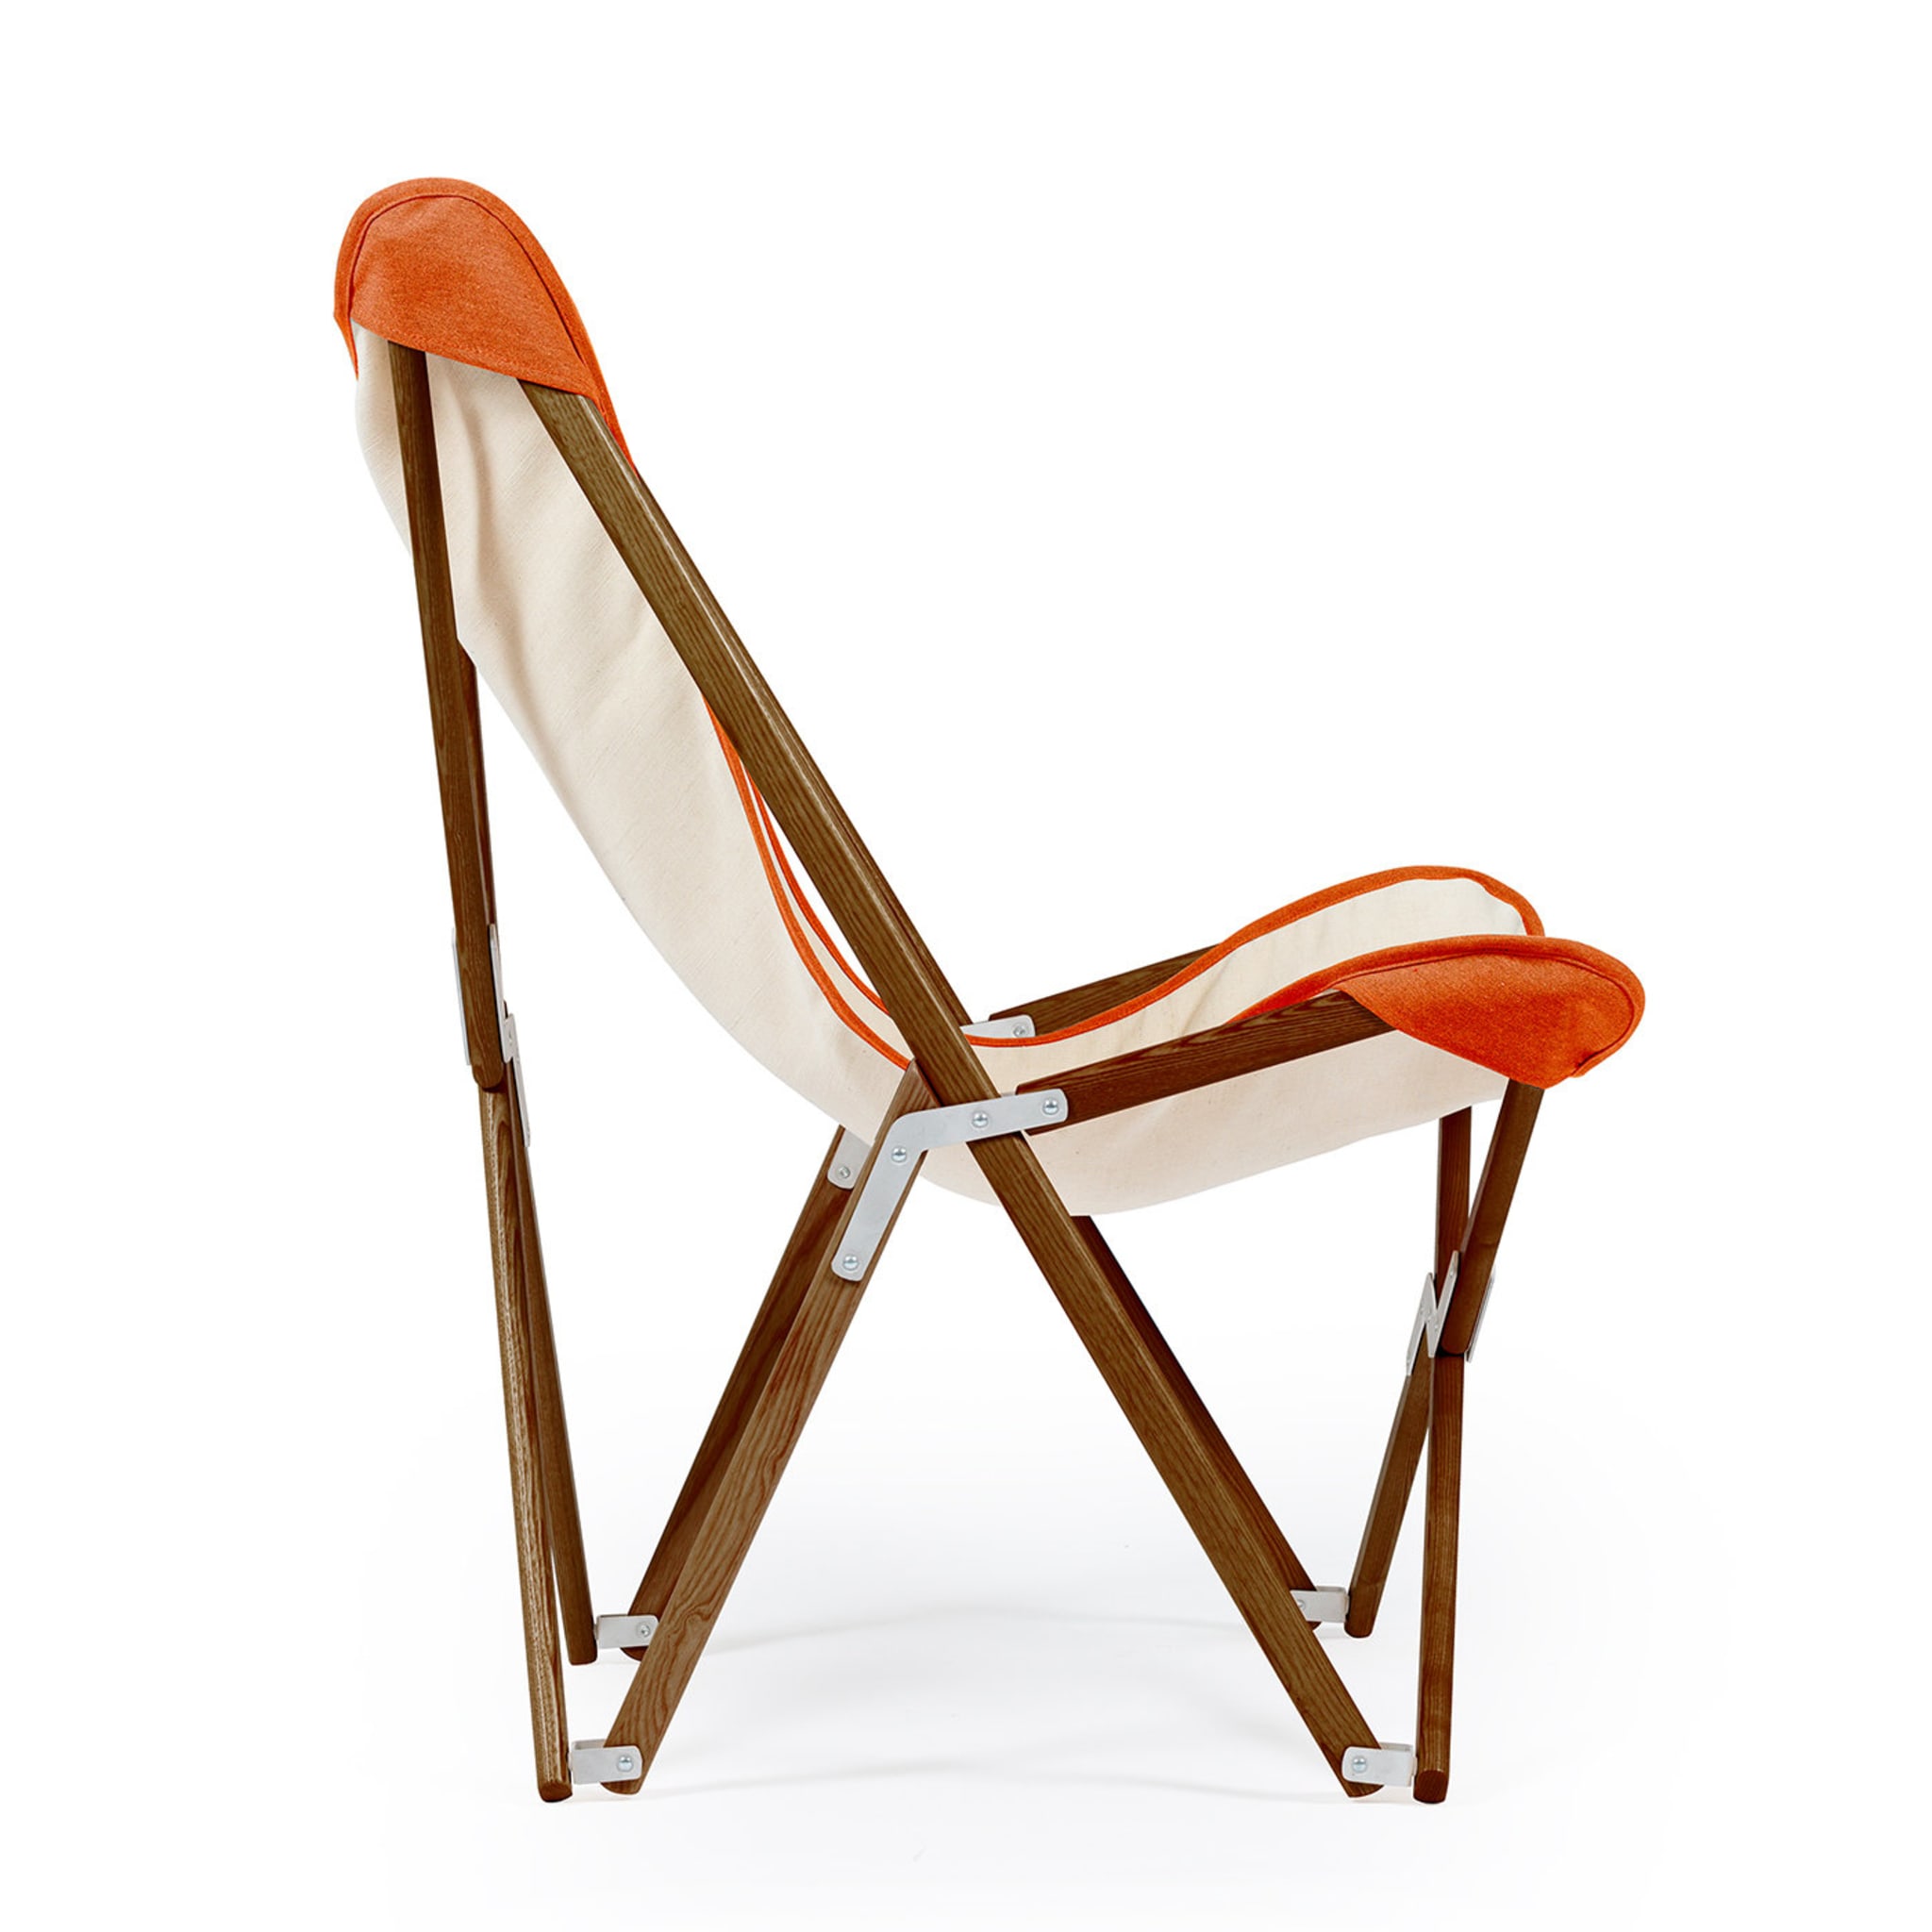 Tripolina Armchair in Cream and Terracotta Red - Alternative view 1